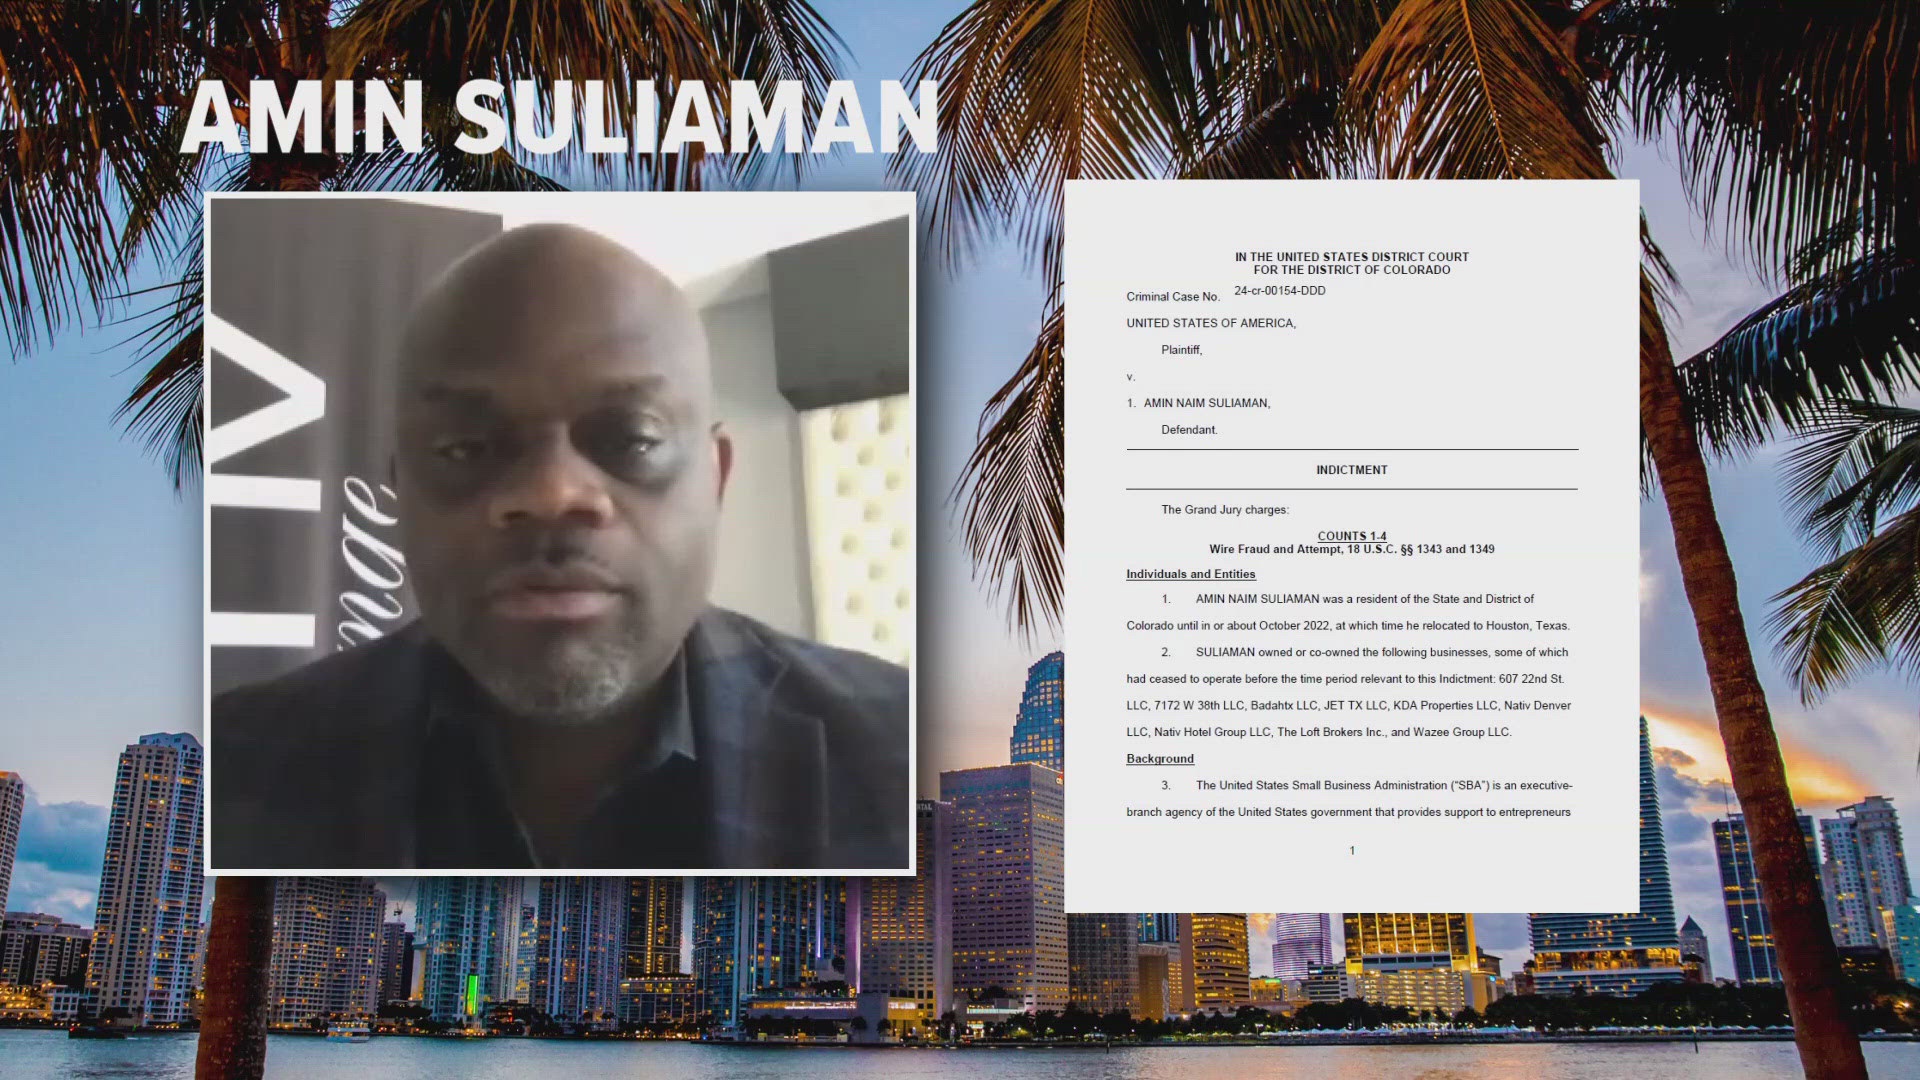 Amin Suliaman was arrested in Miami after a federal grand jury in Colorado indicted him on four counts of wire fraud.